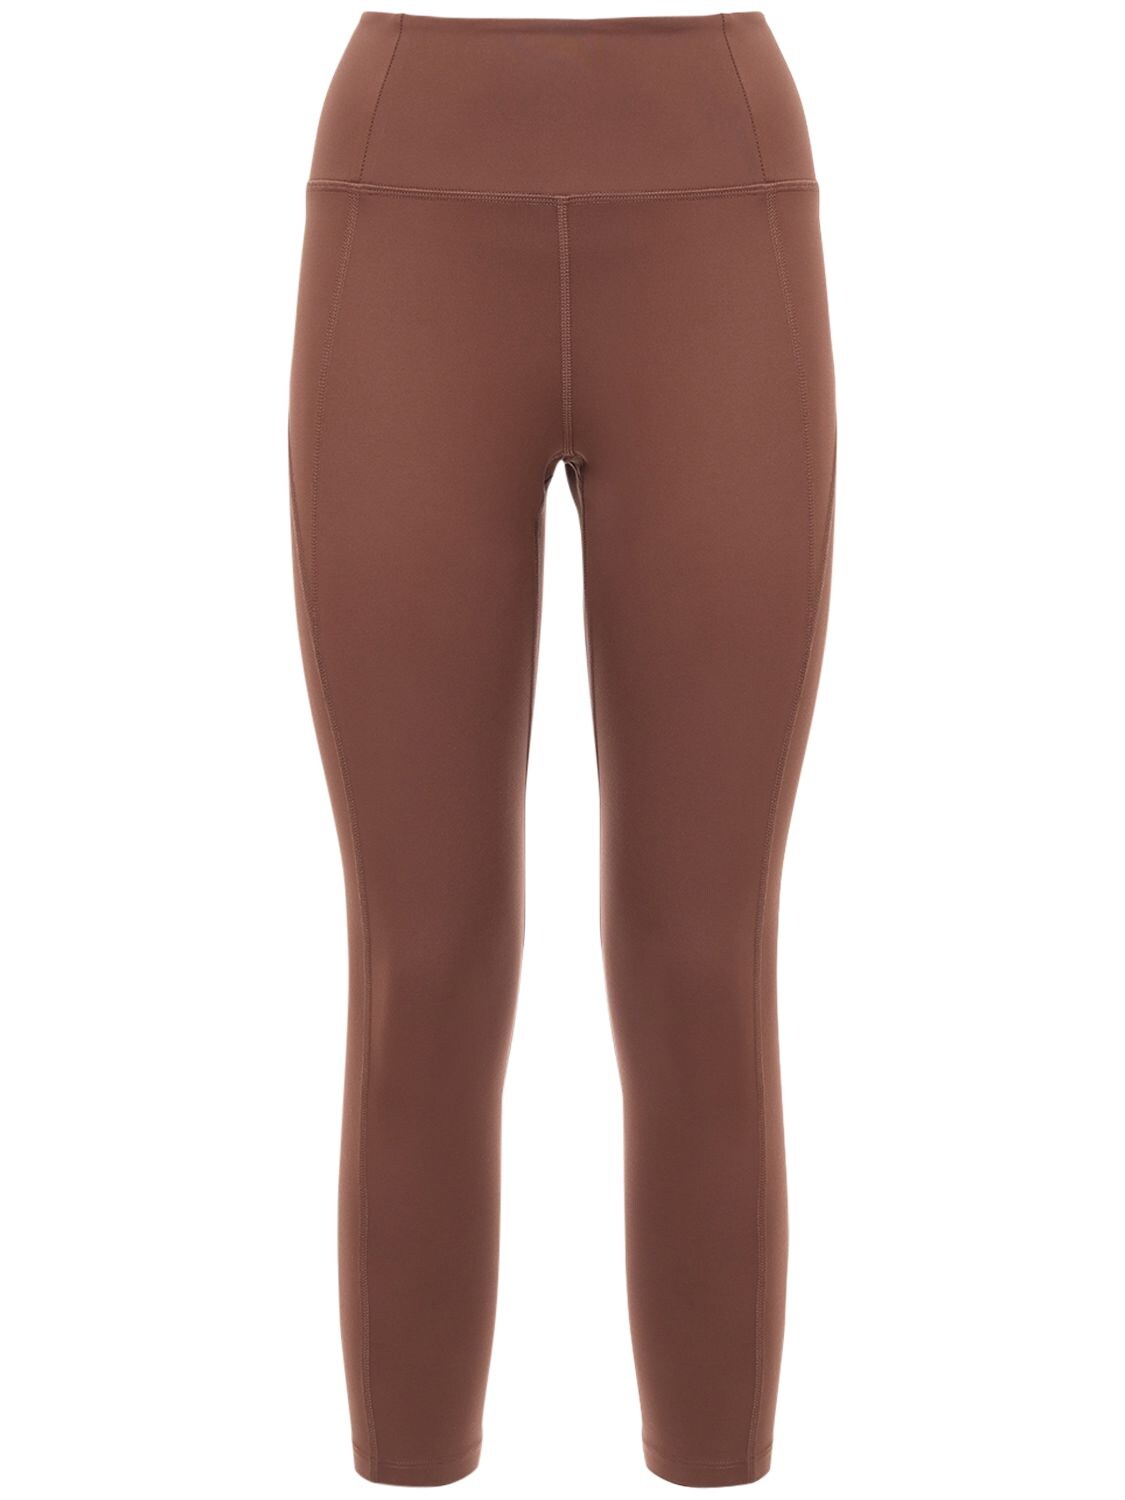 Girlfriend Collective High Waist 7/8 Compression Leggings In Brown